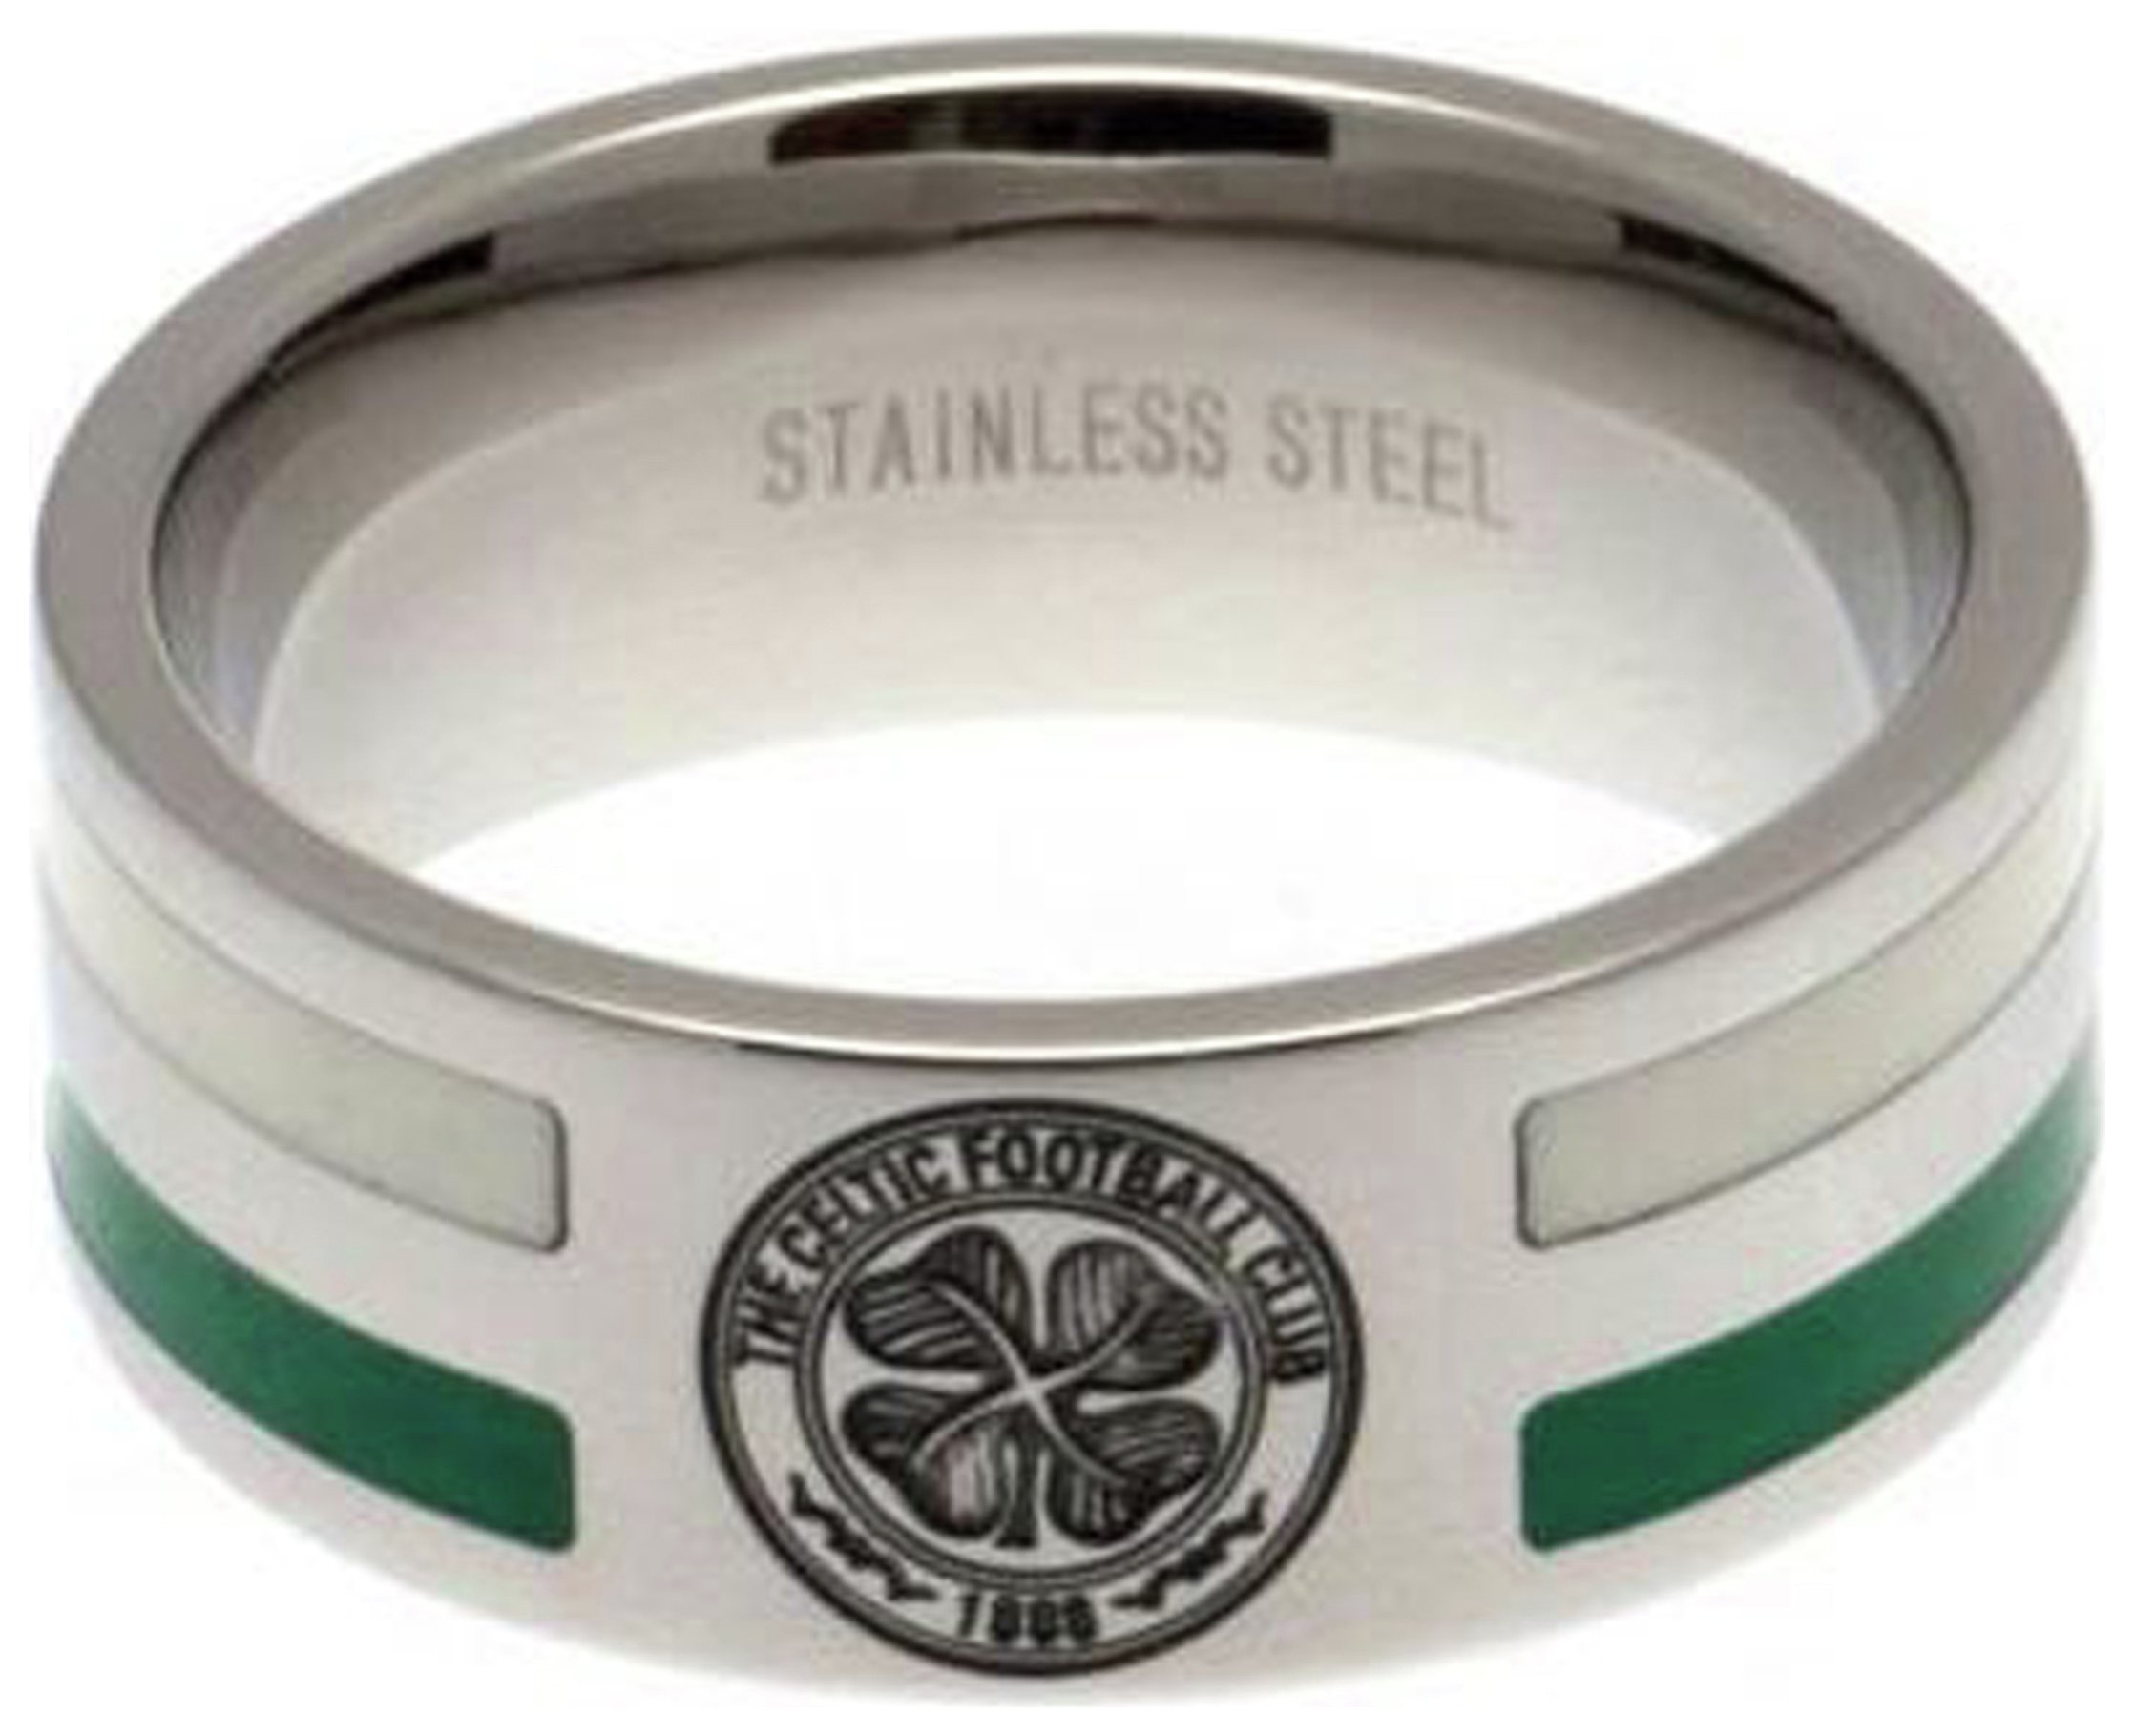 Stainless Steel Celtic Striped Ring - Size X